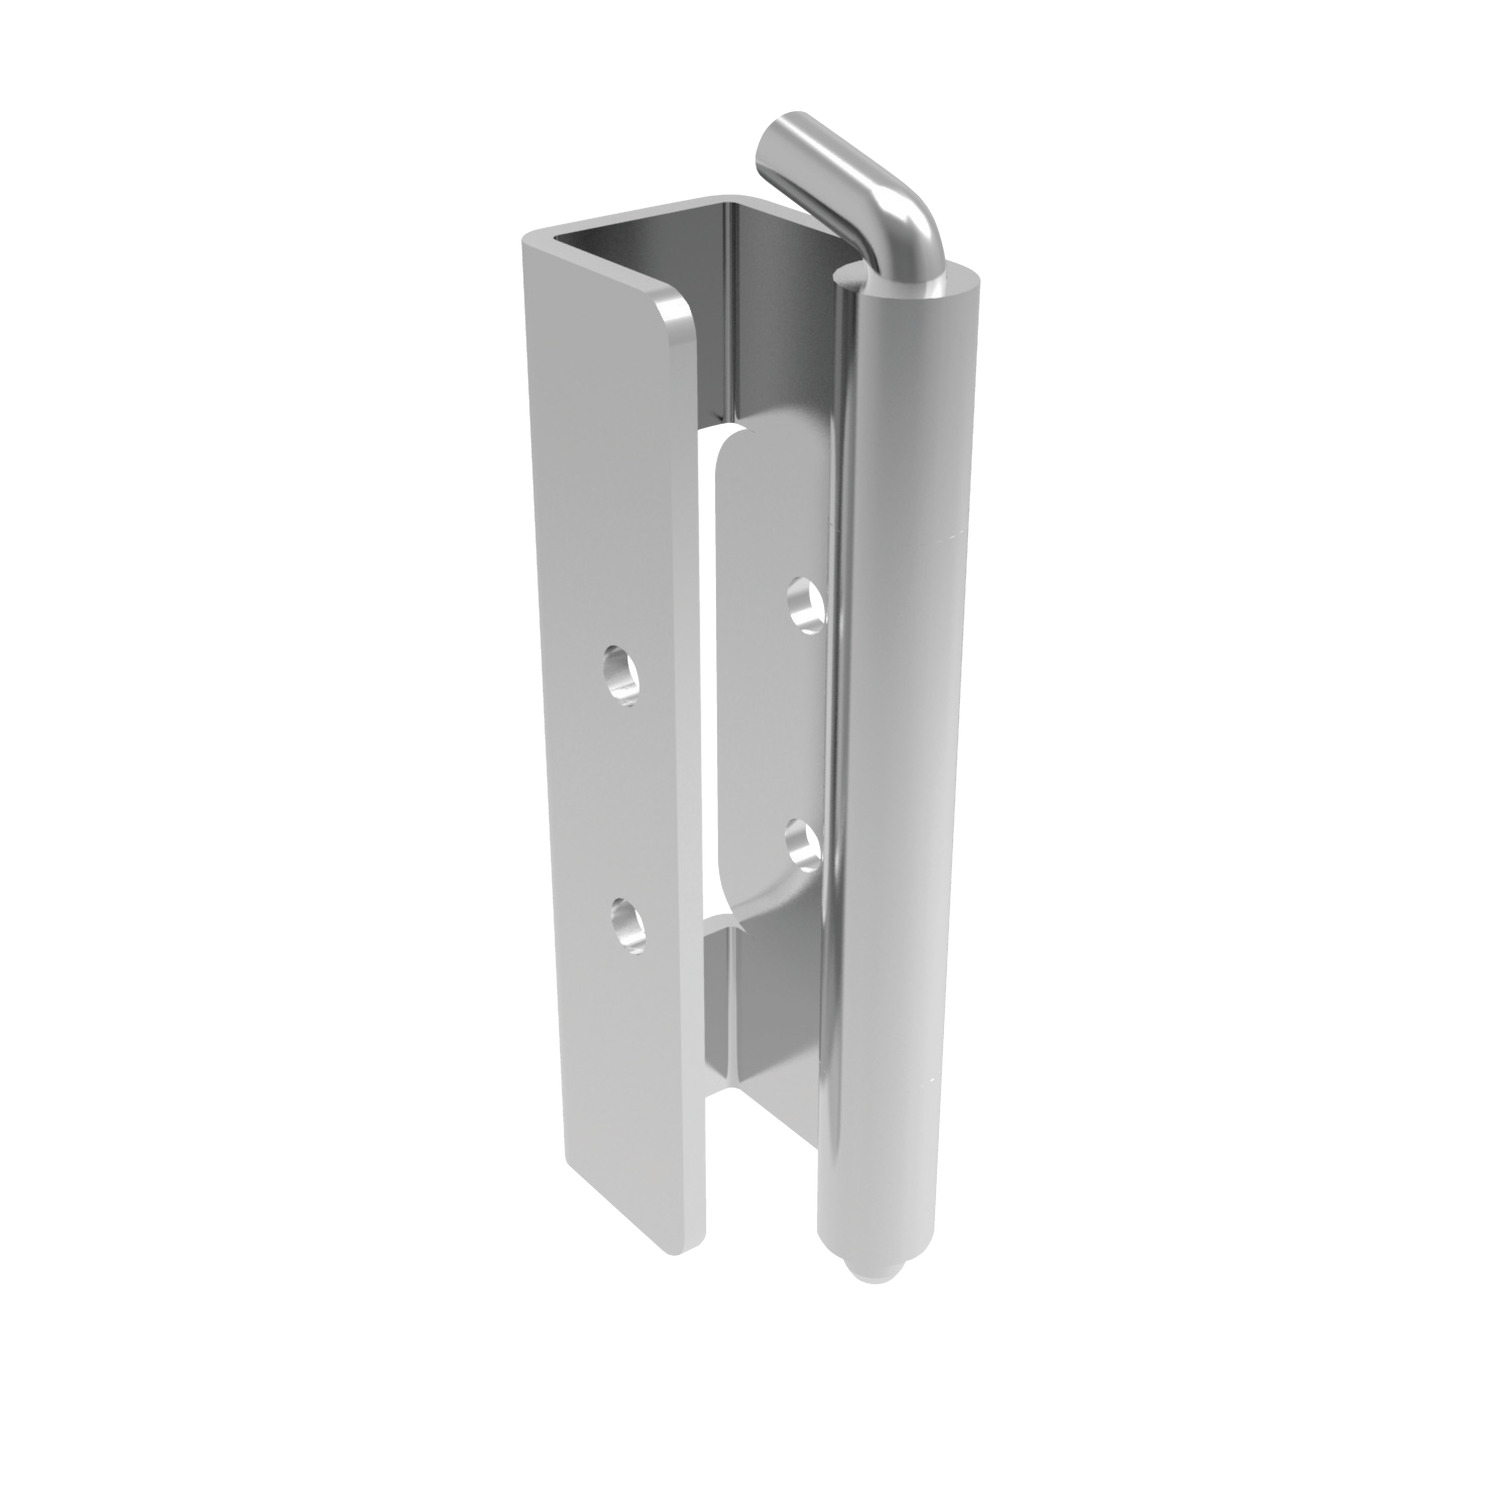 Product S2156, Concealed Pivot Hinges - Lift Off 23mm door return - weld and locking screw - stainless steel / 